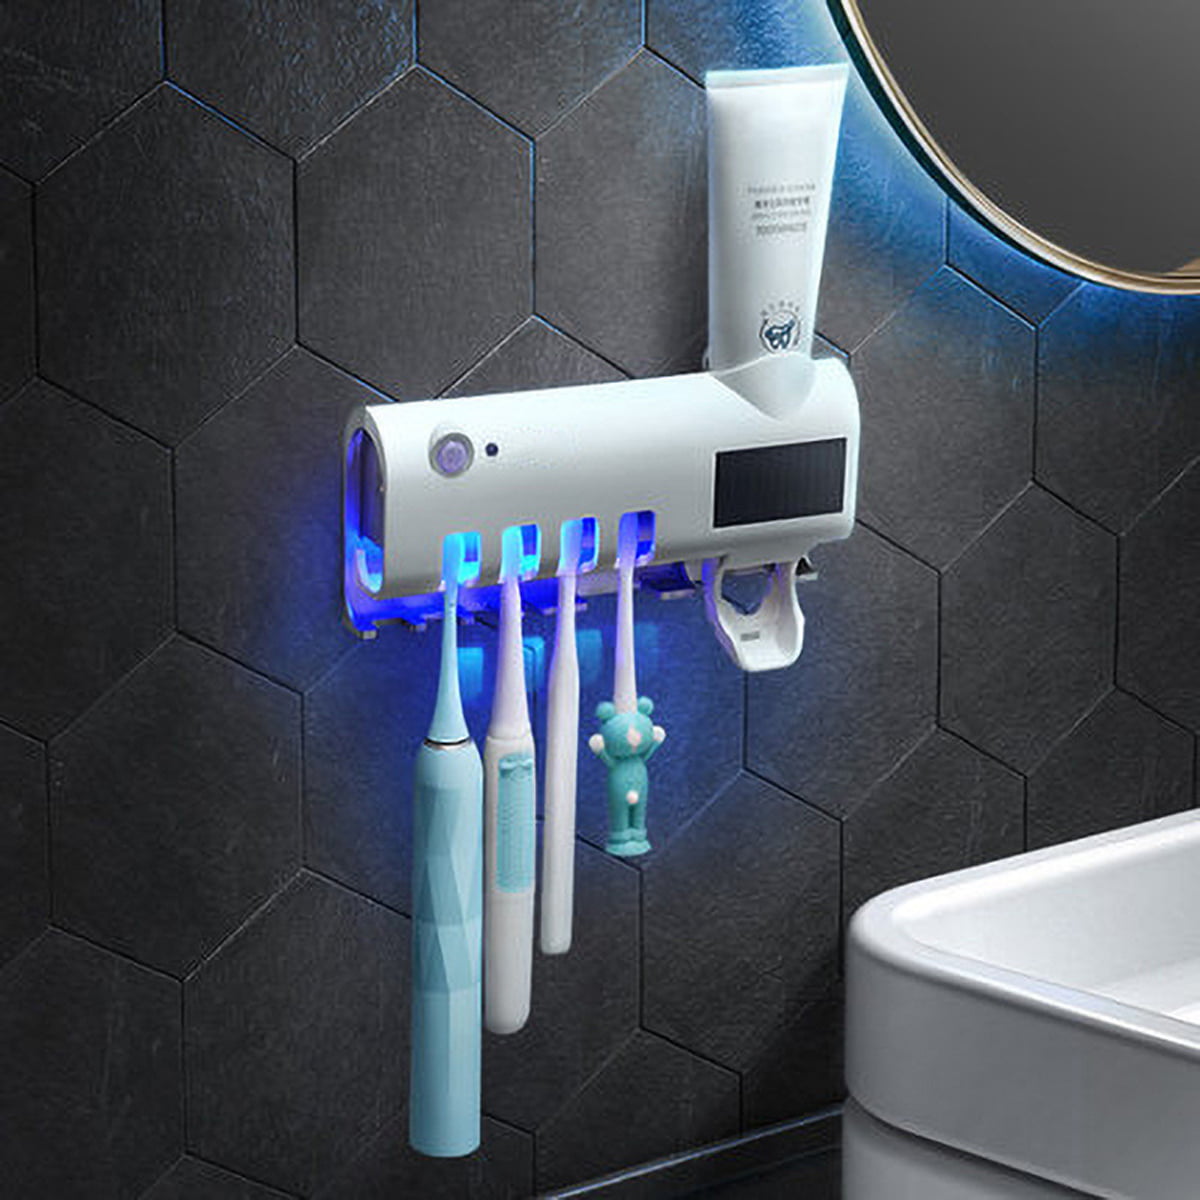 Toothbrush Holder Multifunctional Wall-Mounted Space-Saving Toothbrush & Toothpaste Squeezer Kit with Dustproof Cover, 4 Toothbrush Slots, Automatic Toothpaste Dispenser - Walmart.com